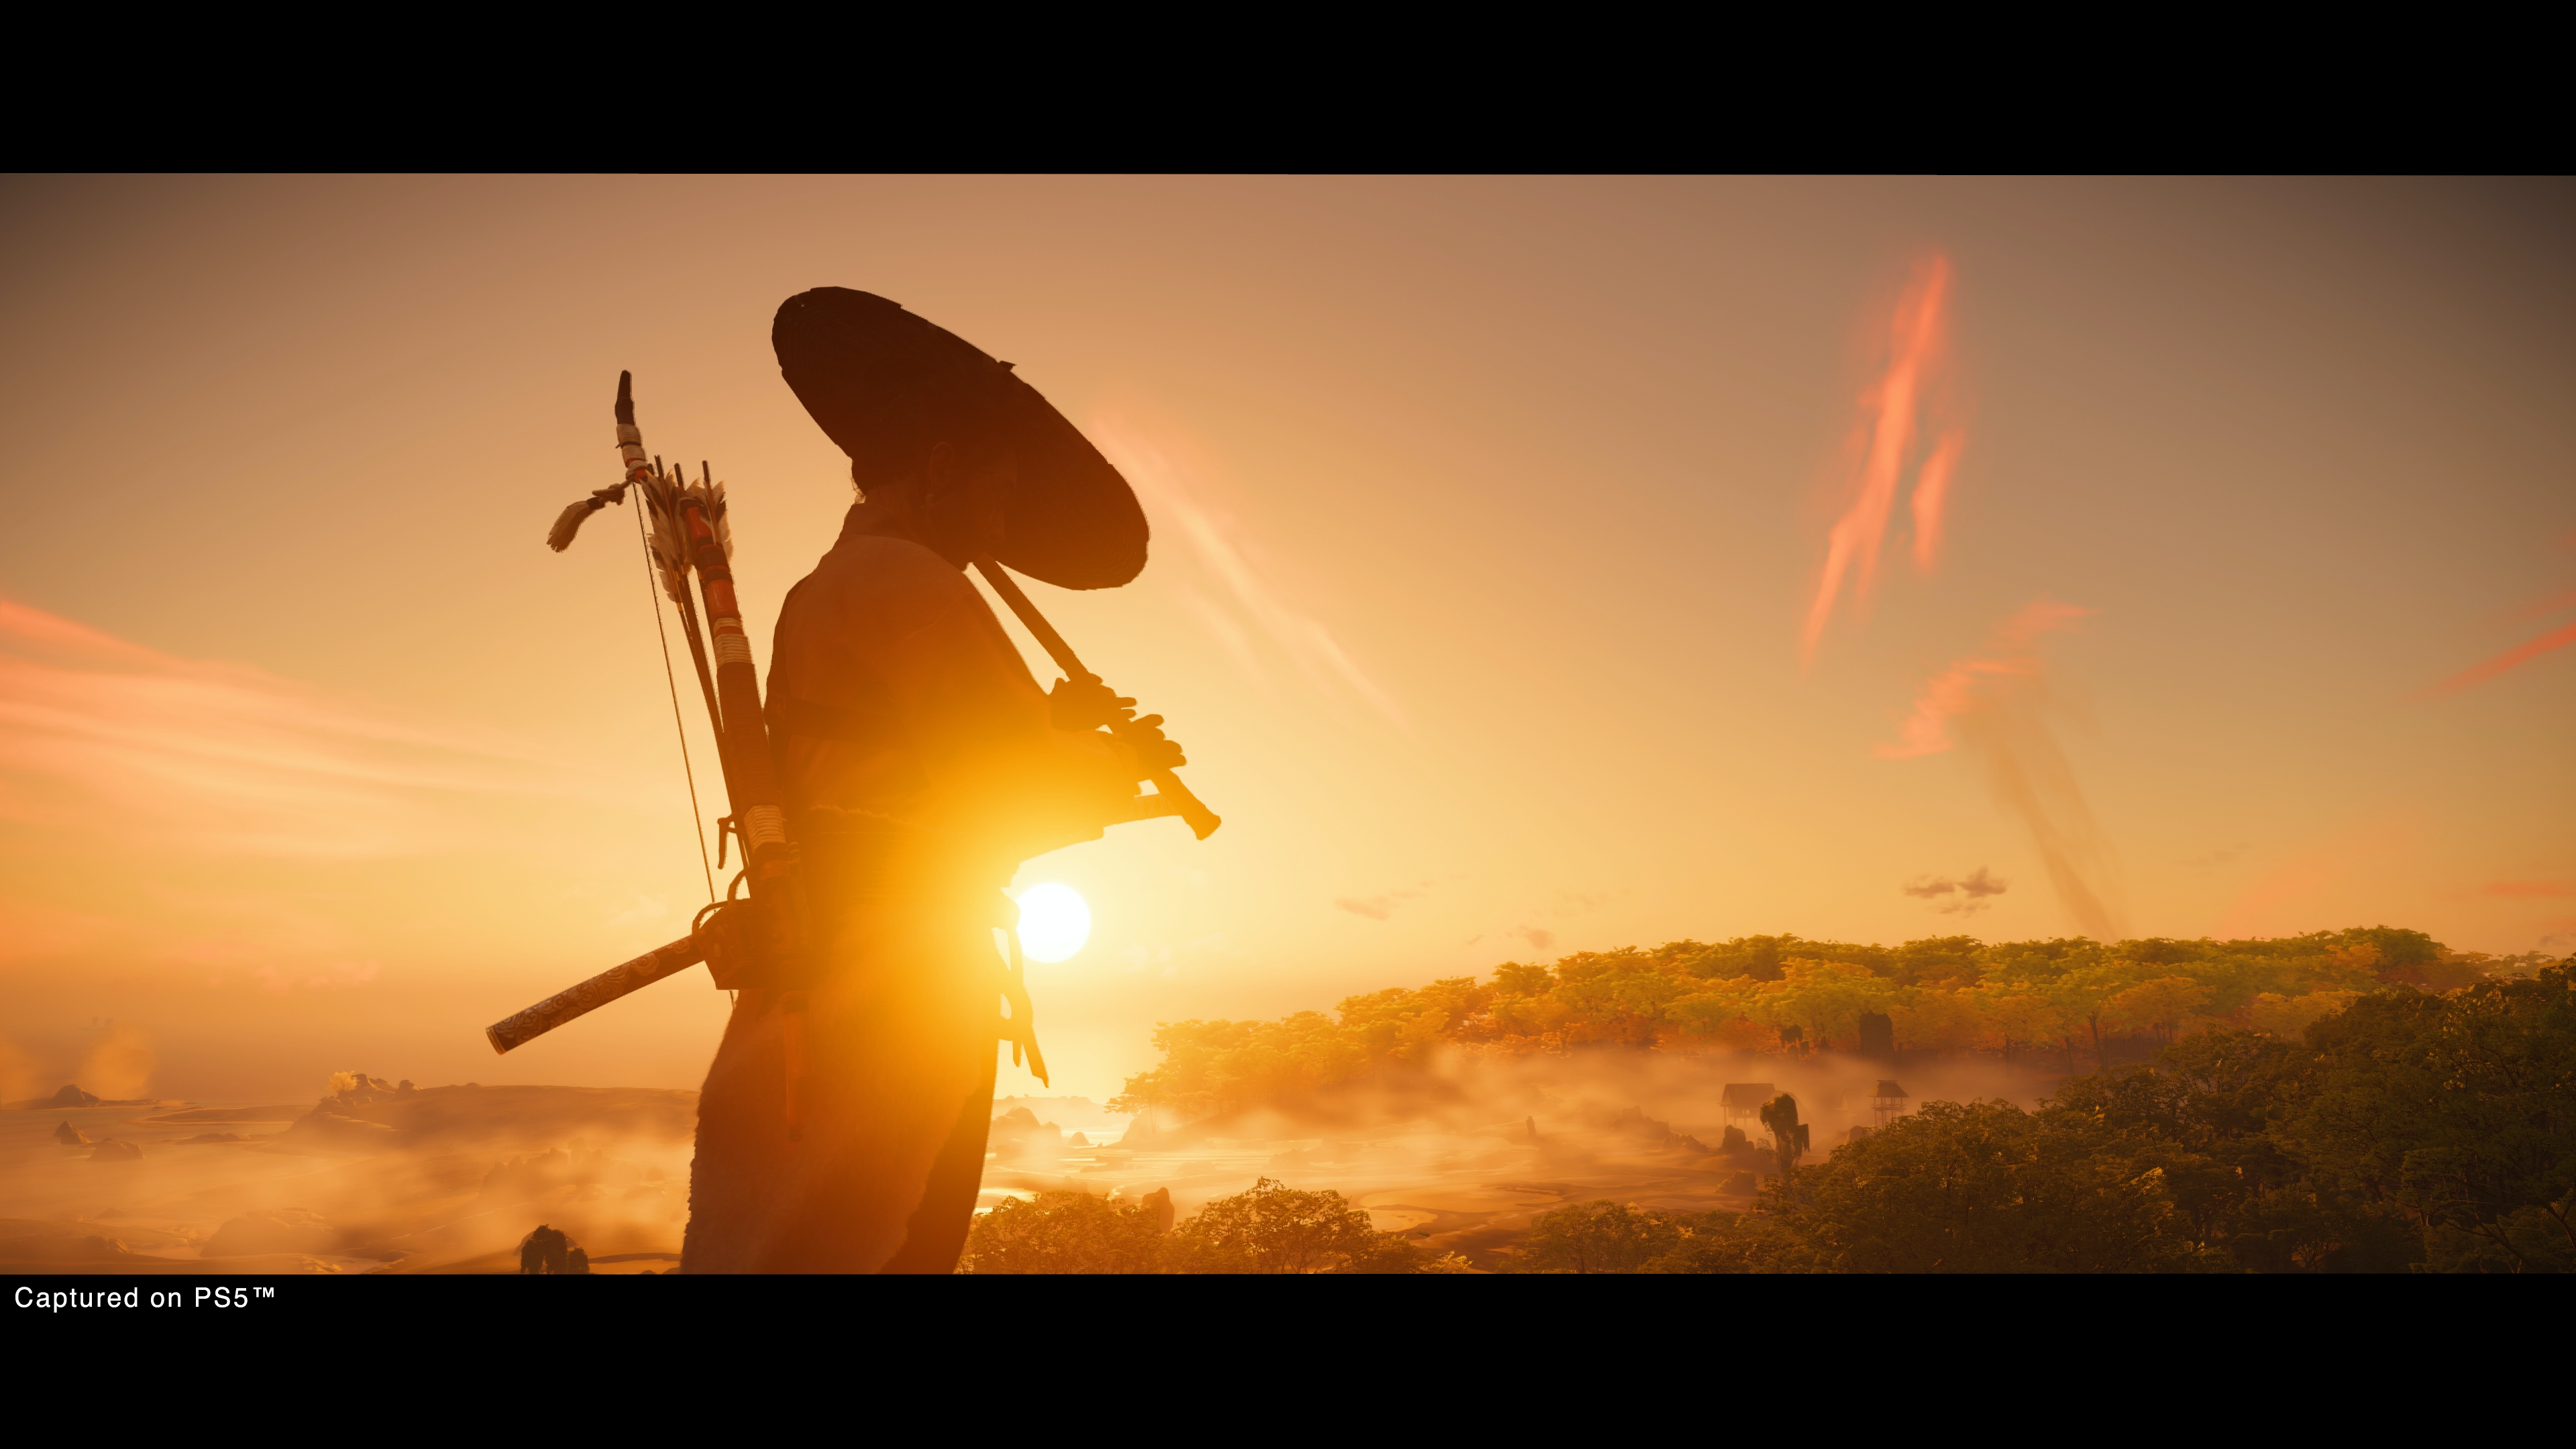 A samurai plays the flute, silhouetted against a sunset